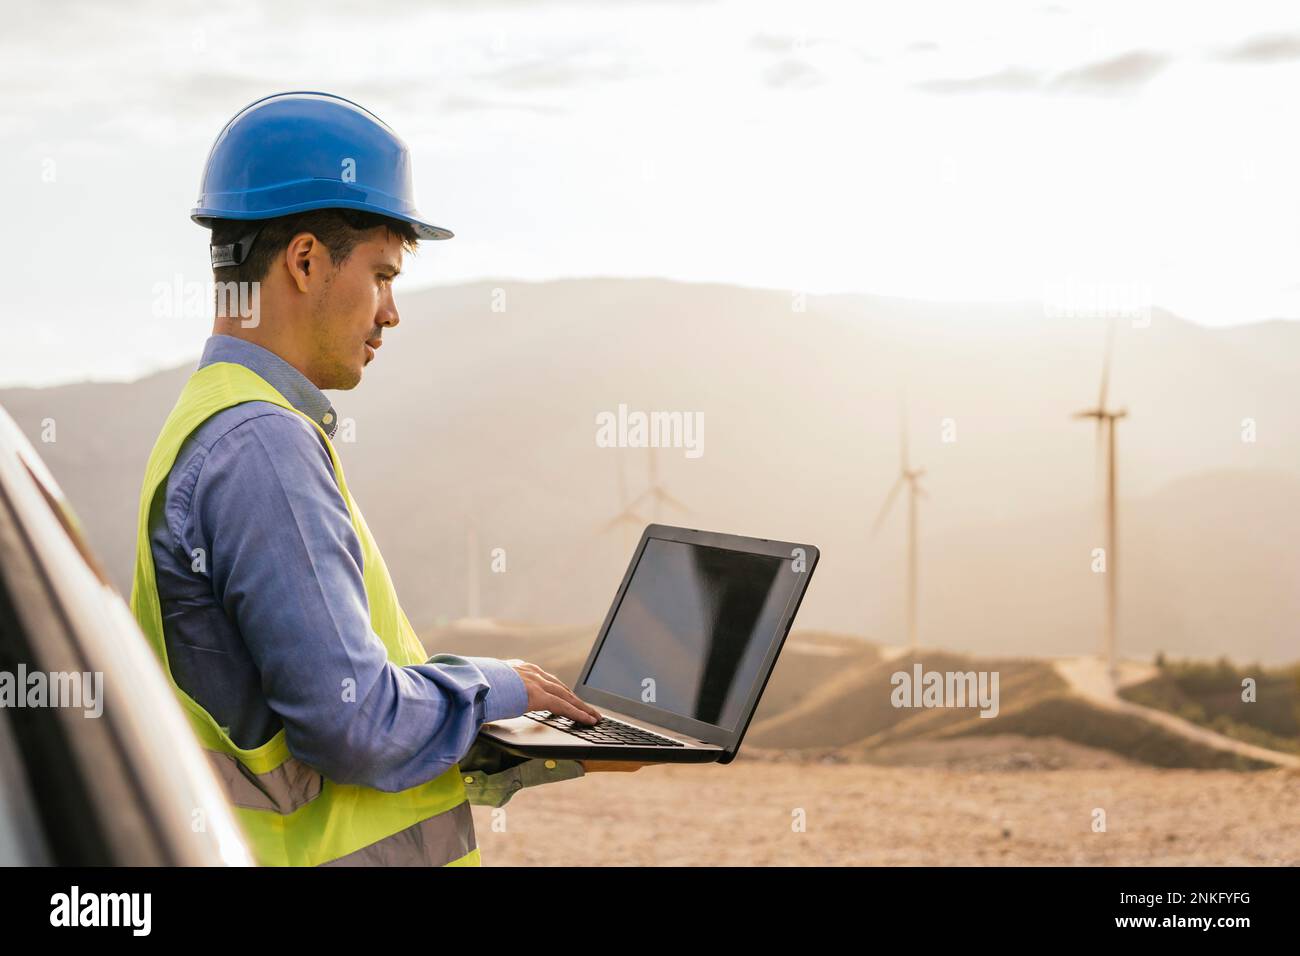 Engineer using laptop leaning on car in front of mountain Stock Photo